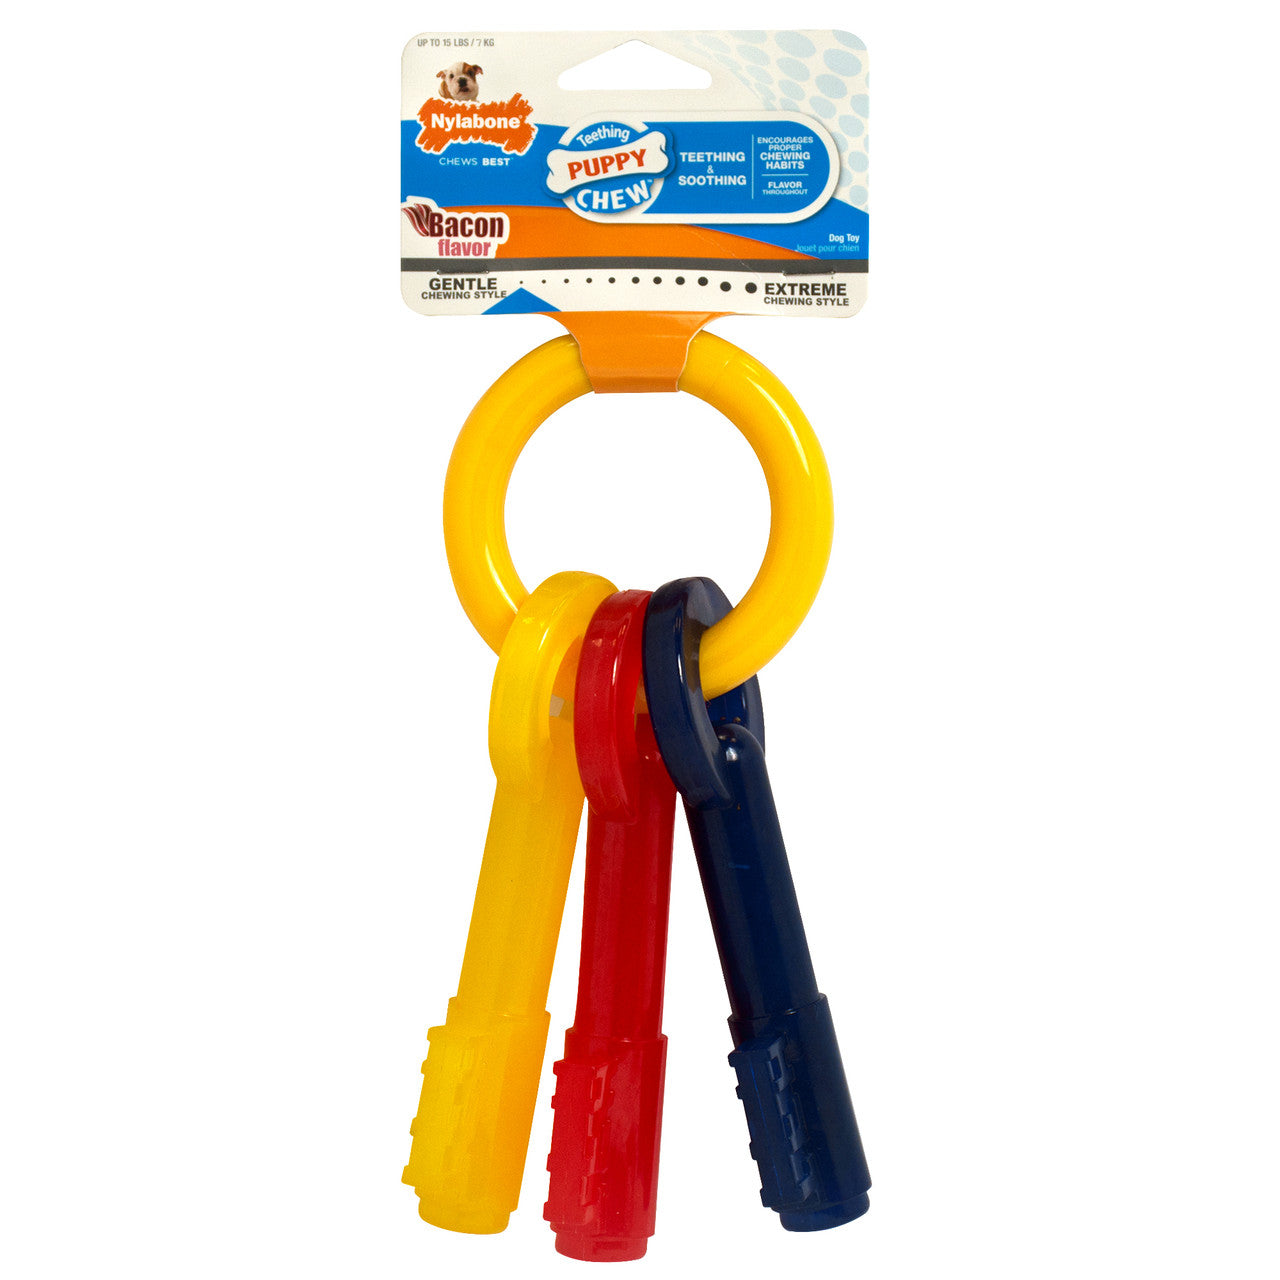 Nylabone Just for Puppies Teething Chew Toy Keys Bacon X-Small/Petite (1 Count)